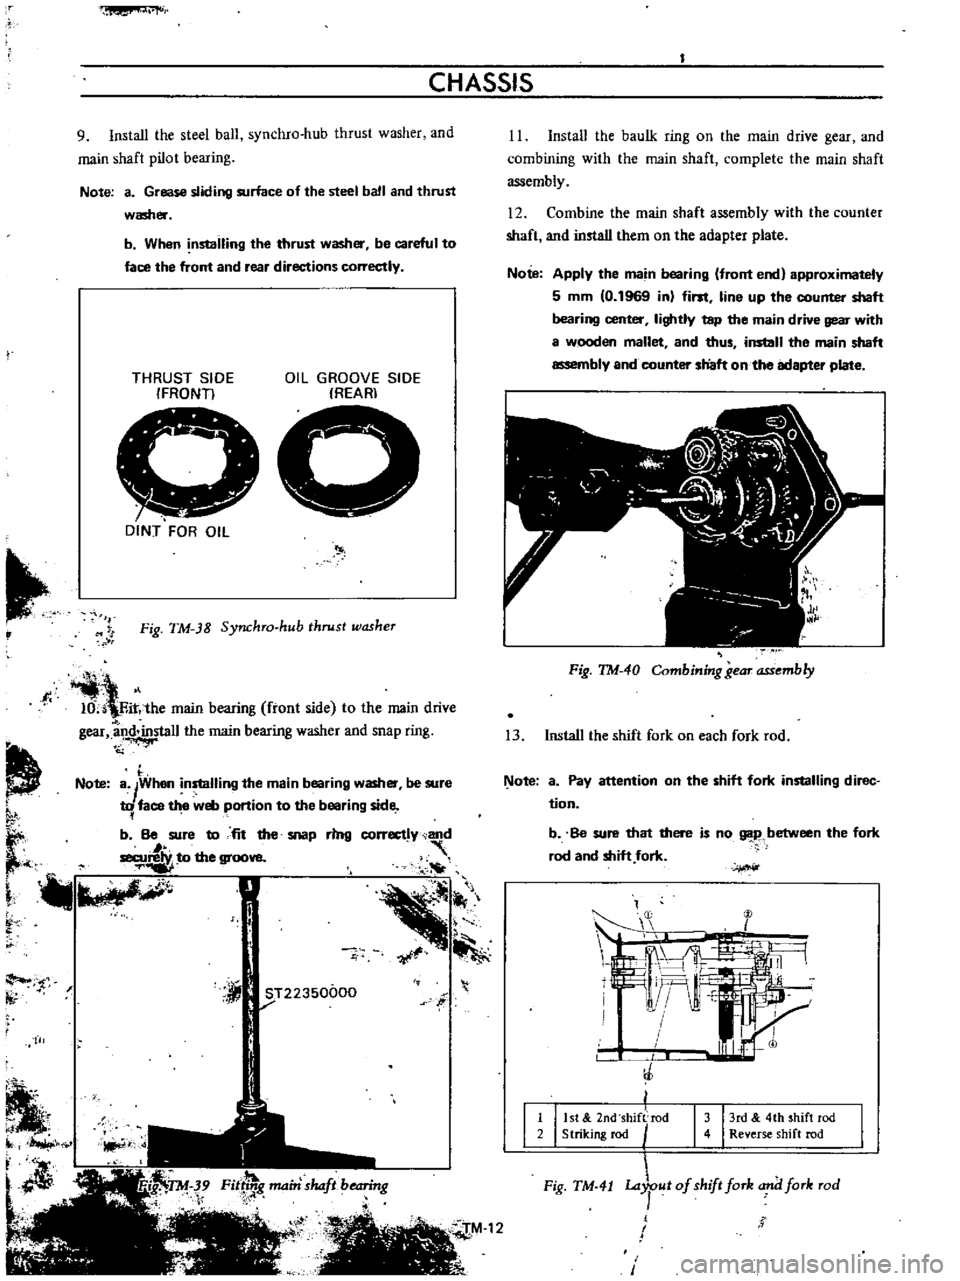 DATSUN B110 1973  Service Manual PDF 
fVI

CHASSIS

9 
Install 
the 
steel 
ball 
synchro 
hub 
thrust 
washer 
and

main 
shaft

pilot 
bearing

Note 
a 
Grease

sliding 
surface 
of 
the 
steel 
ball 
and 
thrust

washer

b 
When

nsta